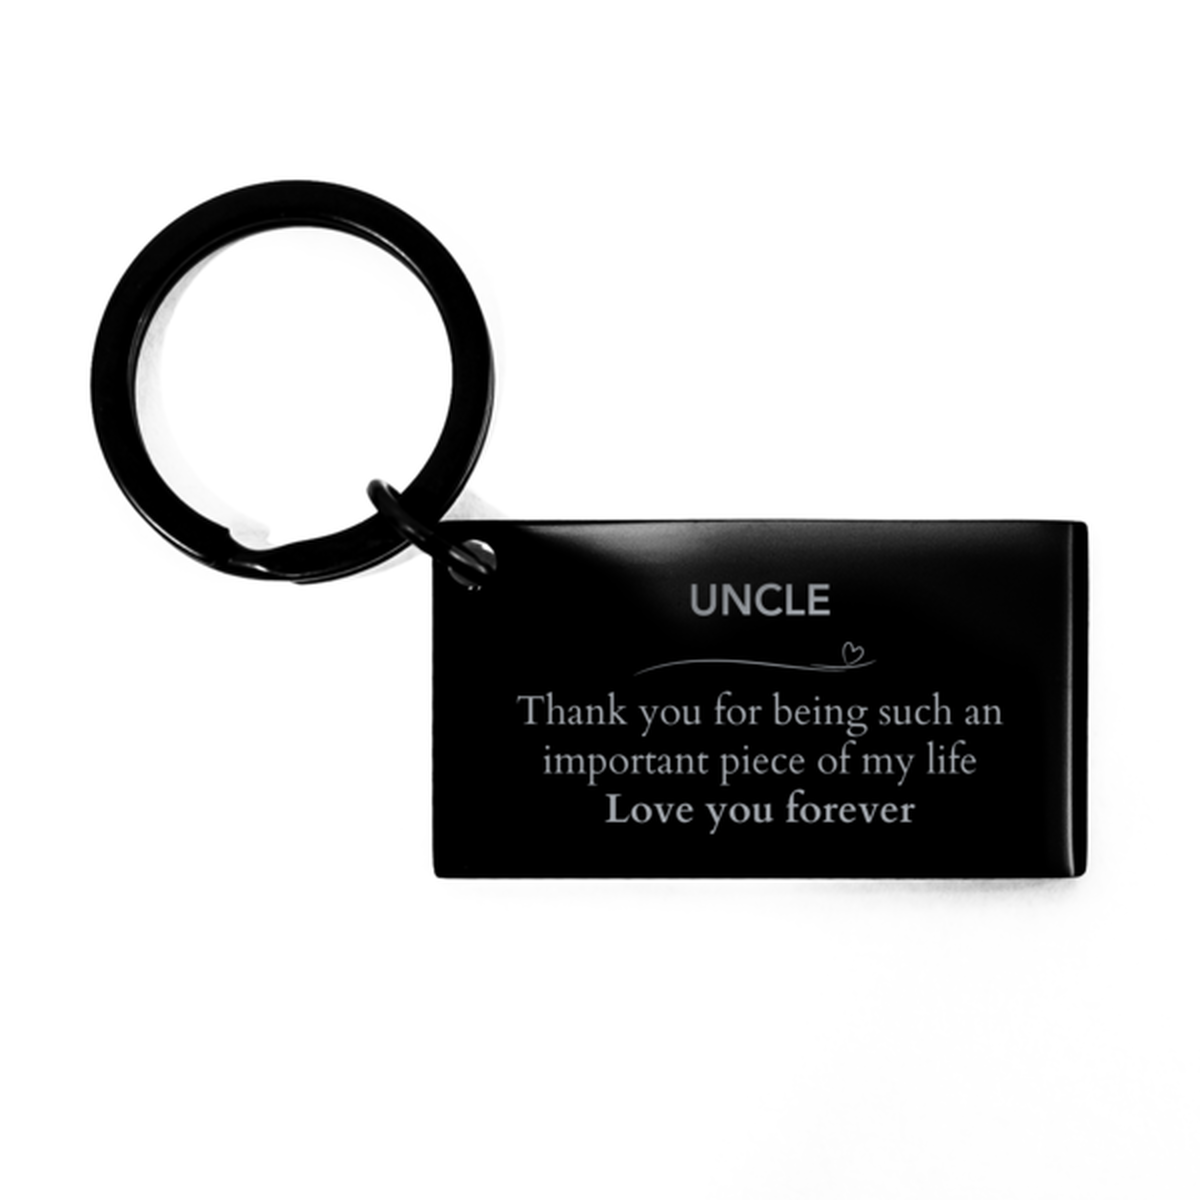 Appropriate Uncle Keychain Epic Birthday Gifts for Uncle Thank you for being such an important piece of my life Uncle Christmas Mothers Fathers Day